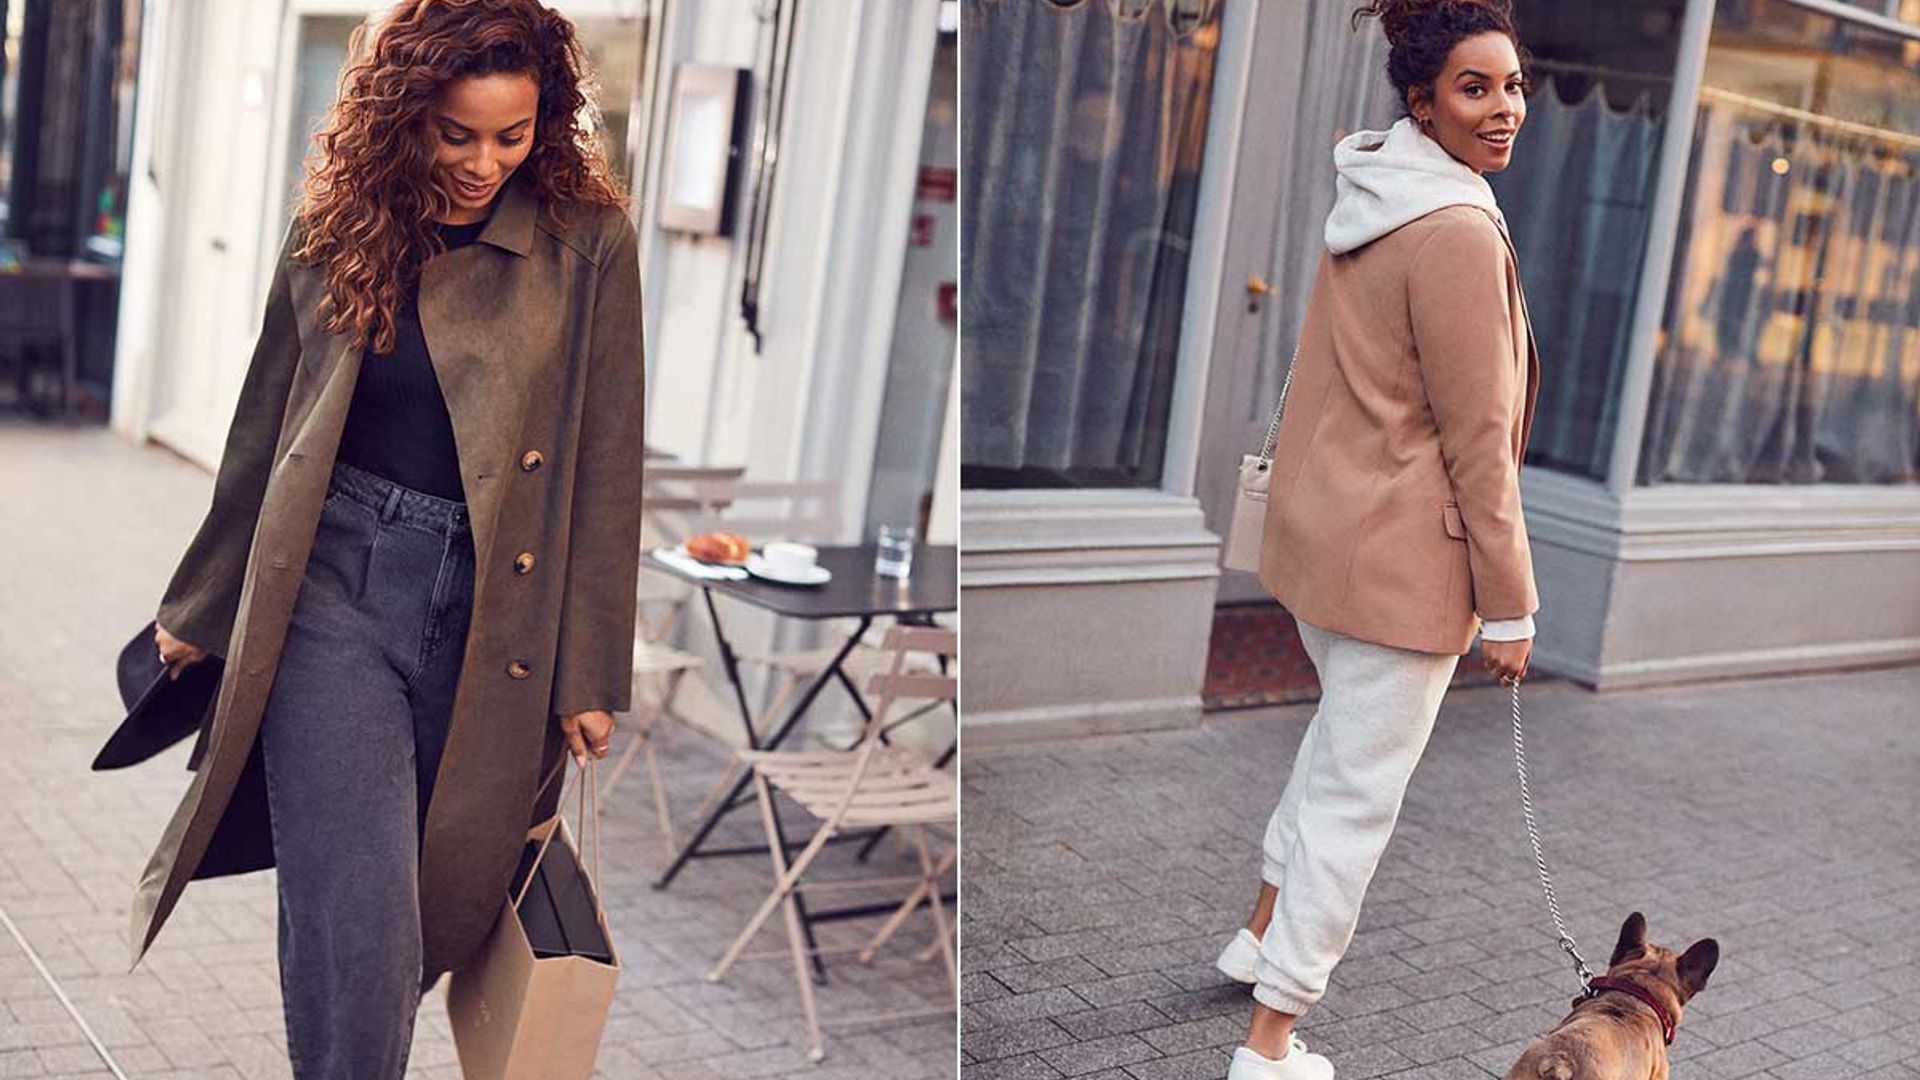 Rochelle Humes' New Look edit is here, and we need everything